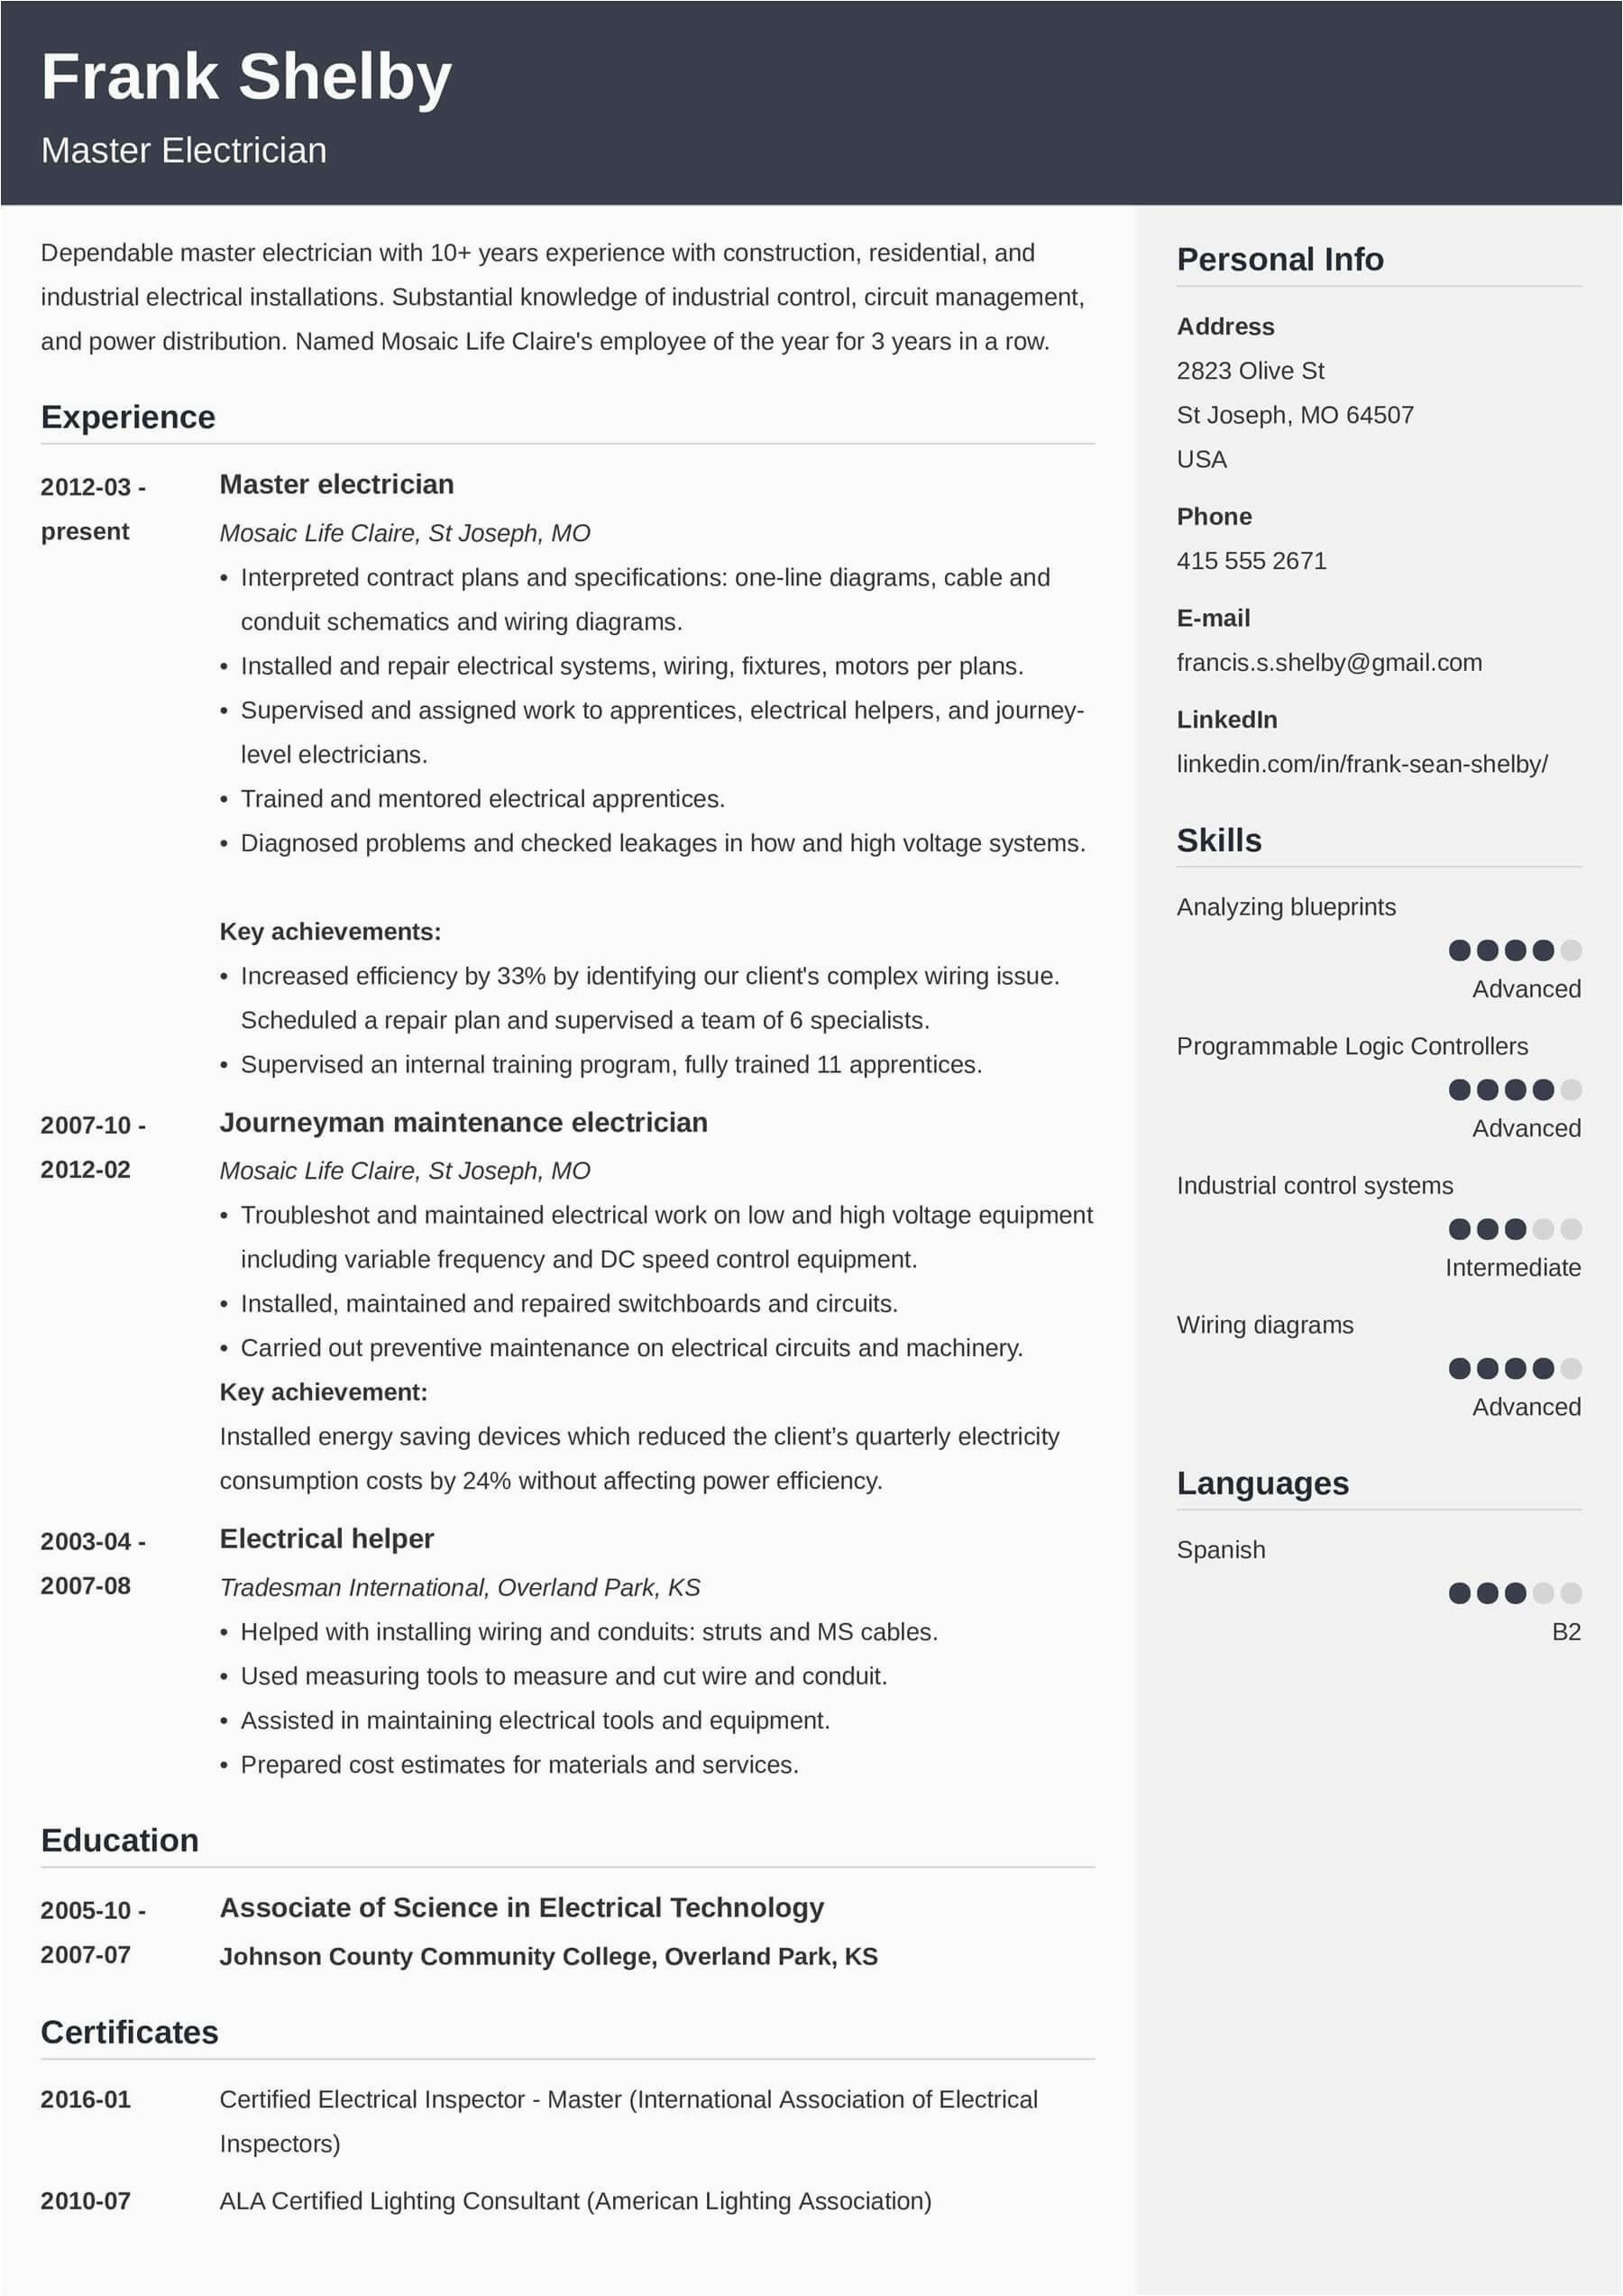 Samples Of Different Styles Of Resumes Current Resume Styles—find the Best E [gallery & Tips]